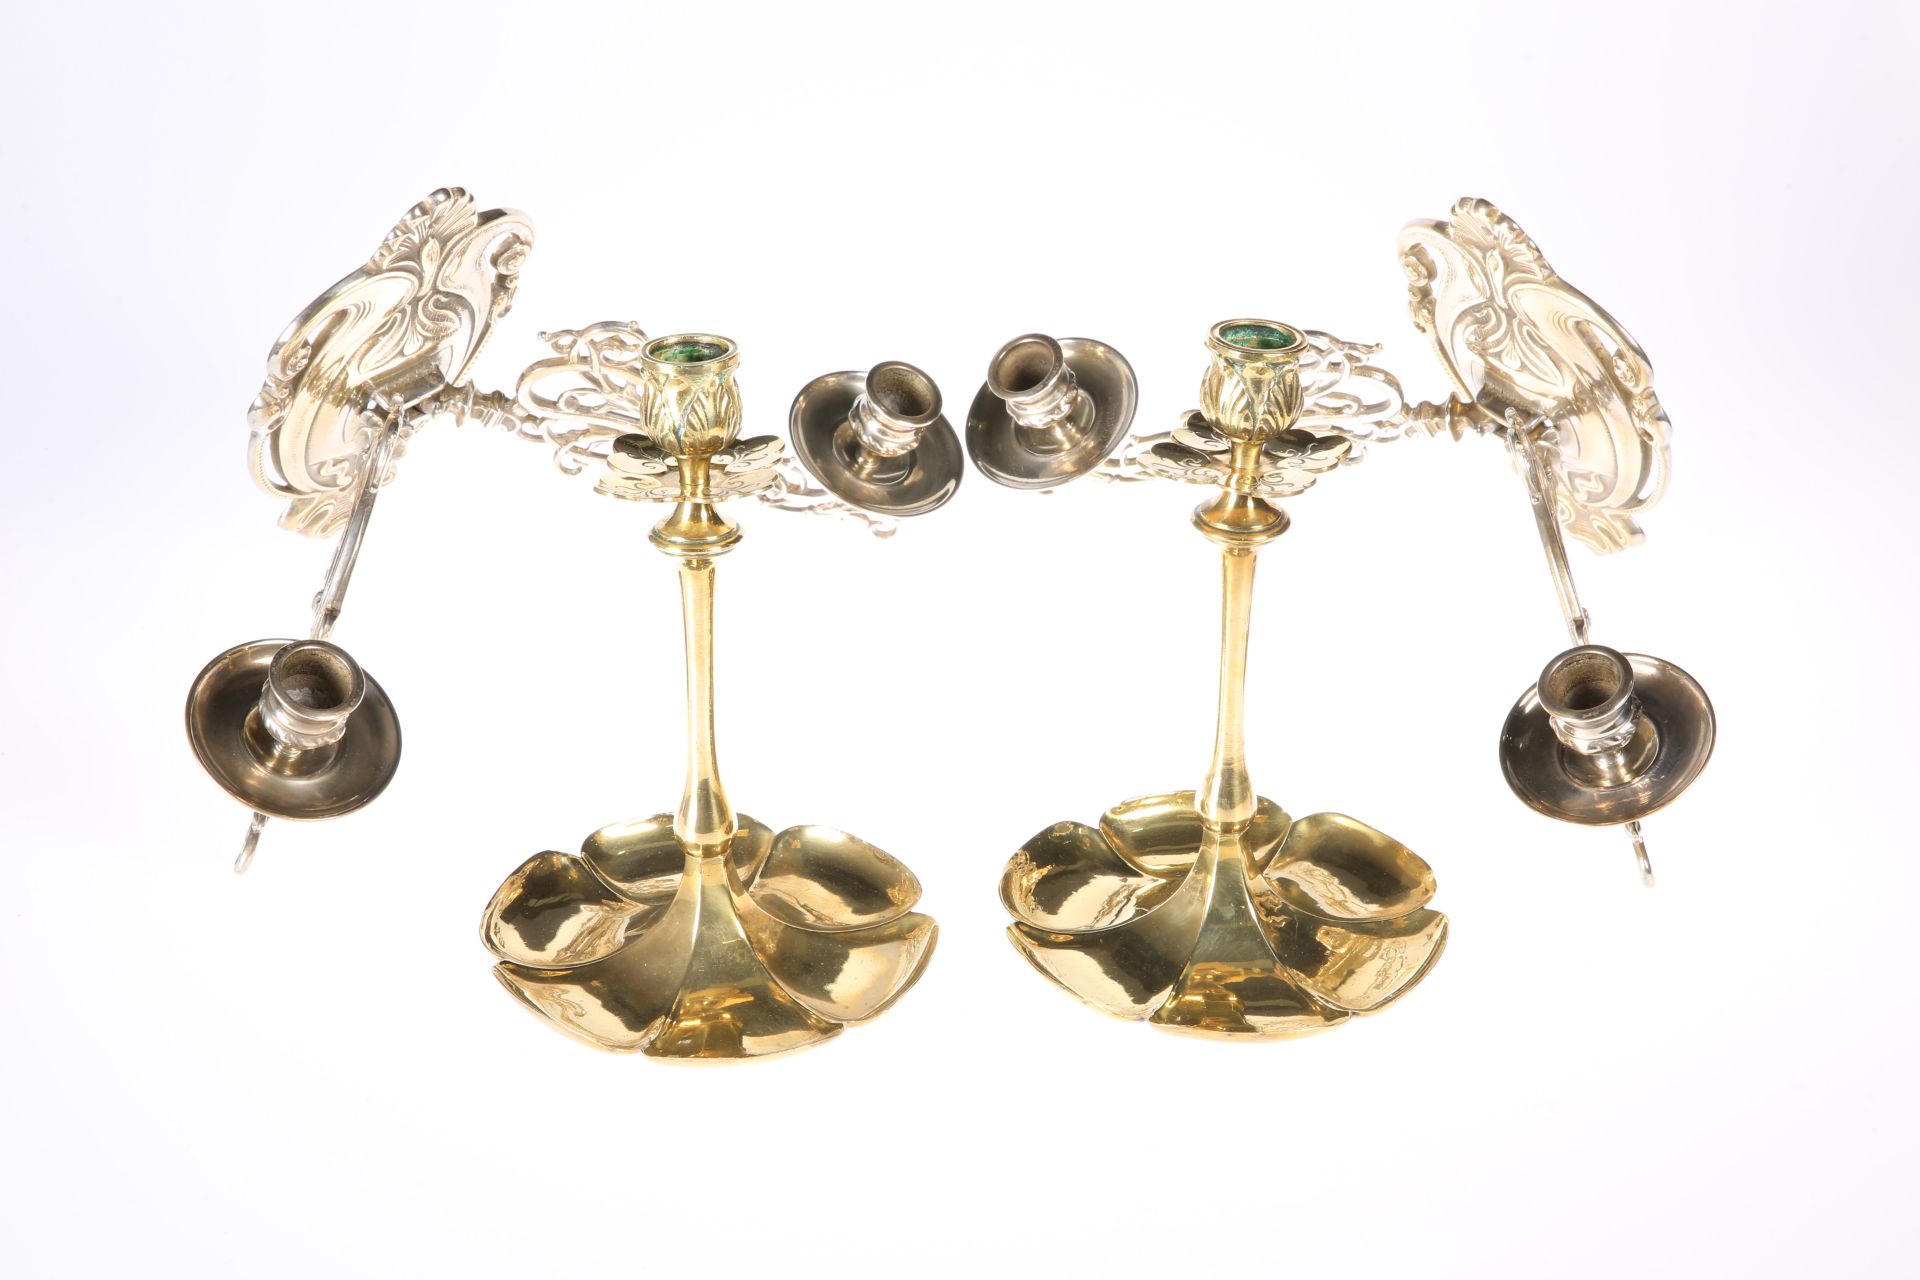 A PAIR OF LATE VICTORIAN BRASS CANDLESTICKS, each with lobed base; together with A PAIR OF ART